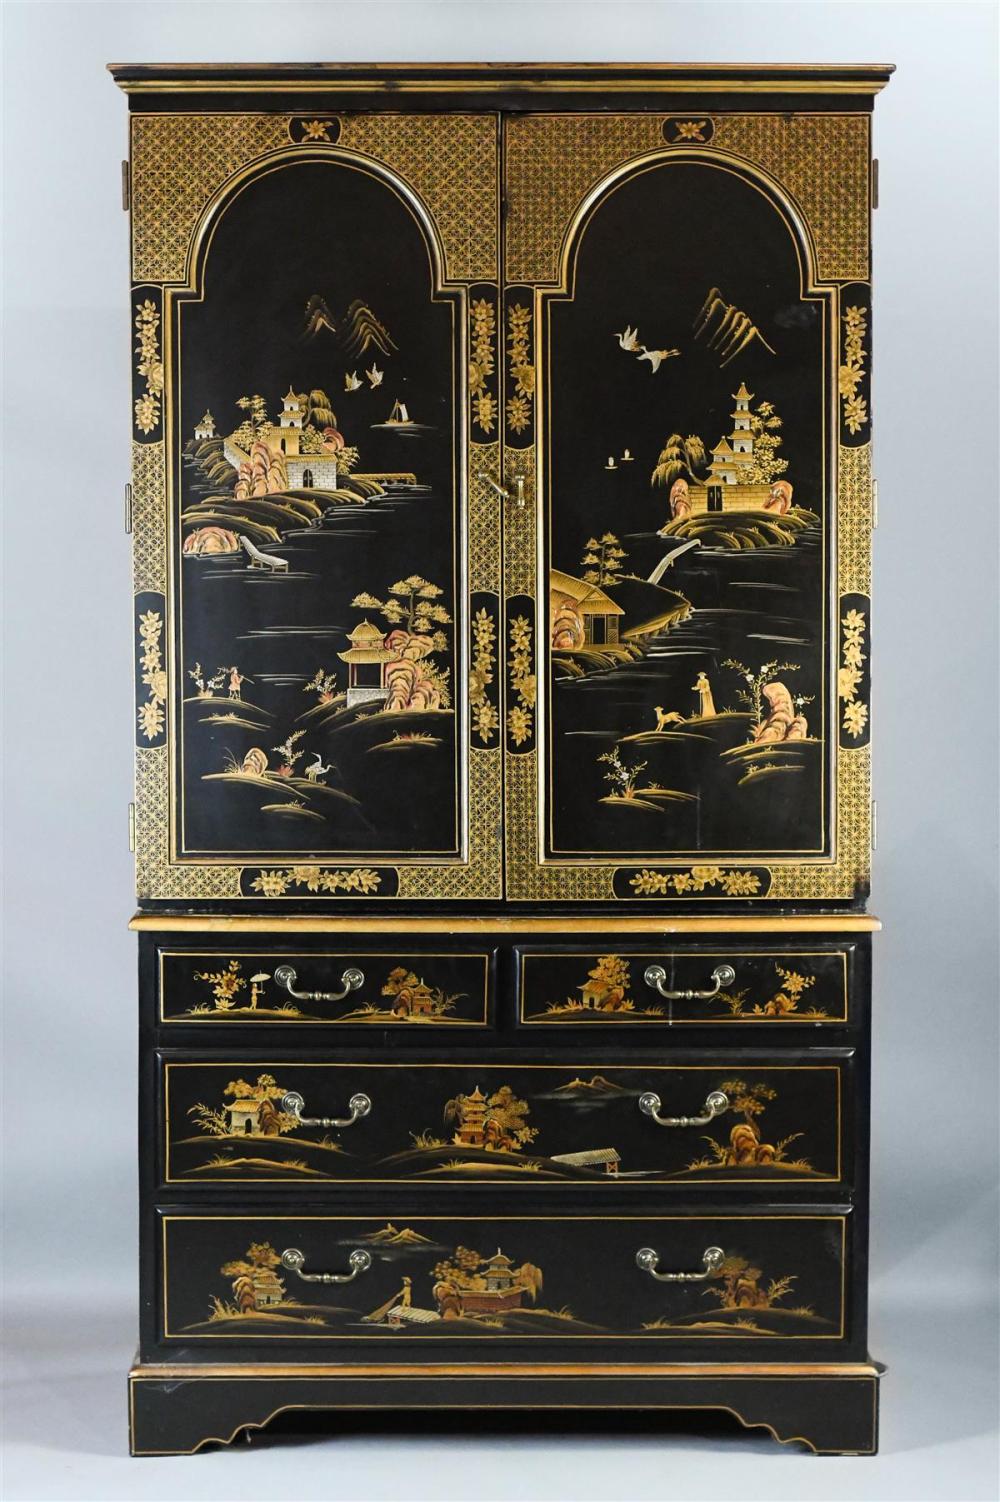 GEORGE III STYLE CHINOISERIE DECORATED 311d0a